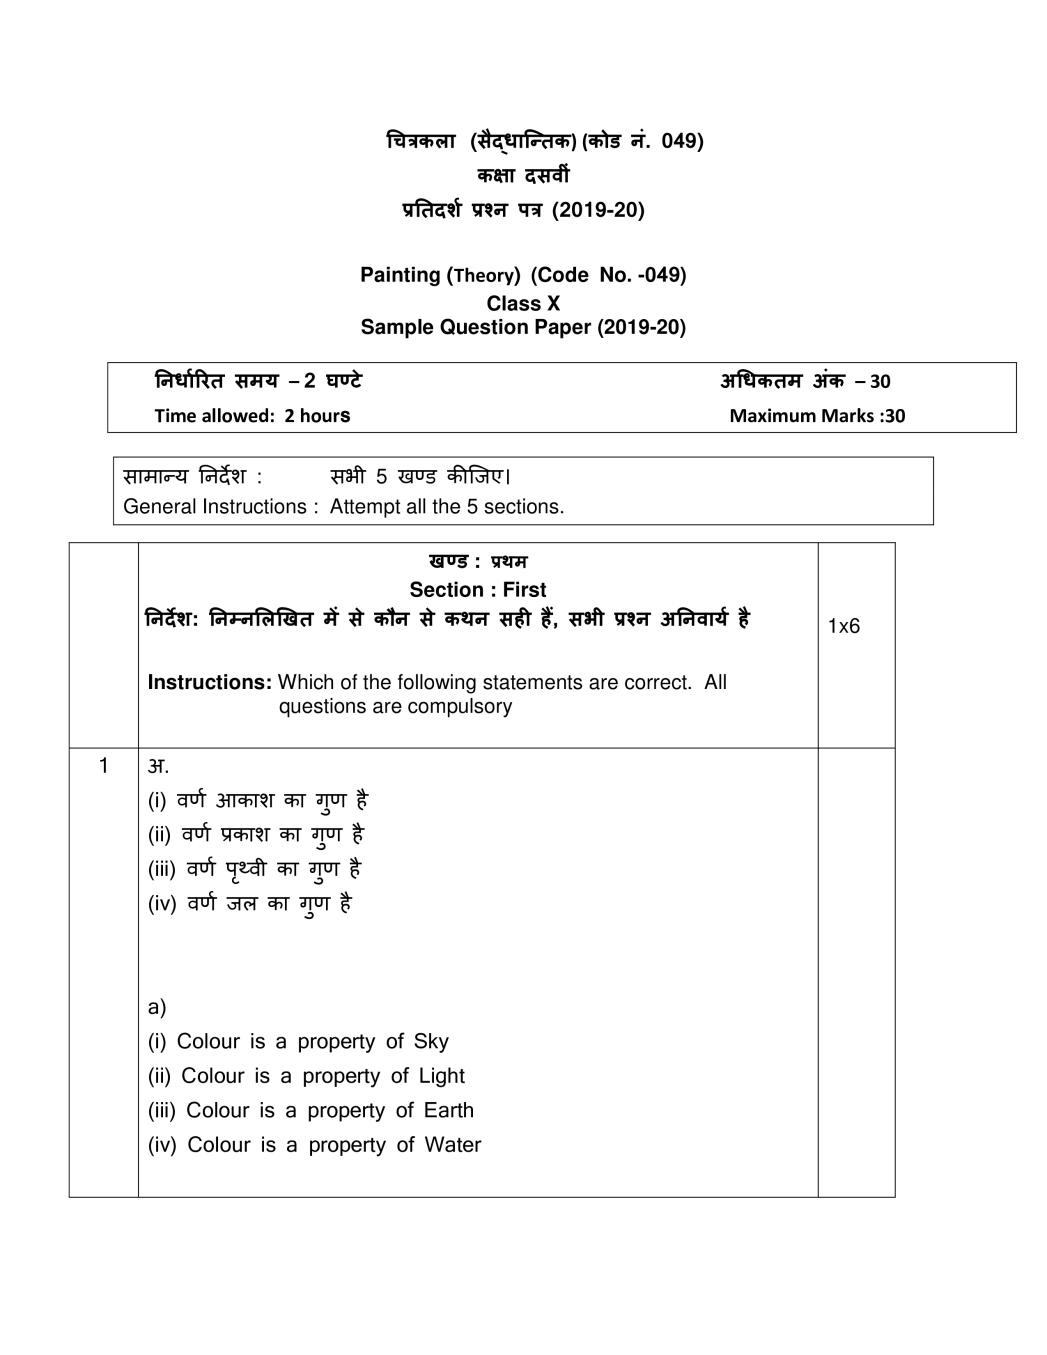 CBSE Class 10 Sample Paper 2020 for painting - Page 1